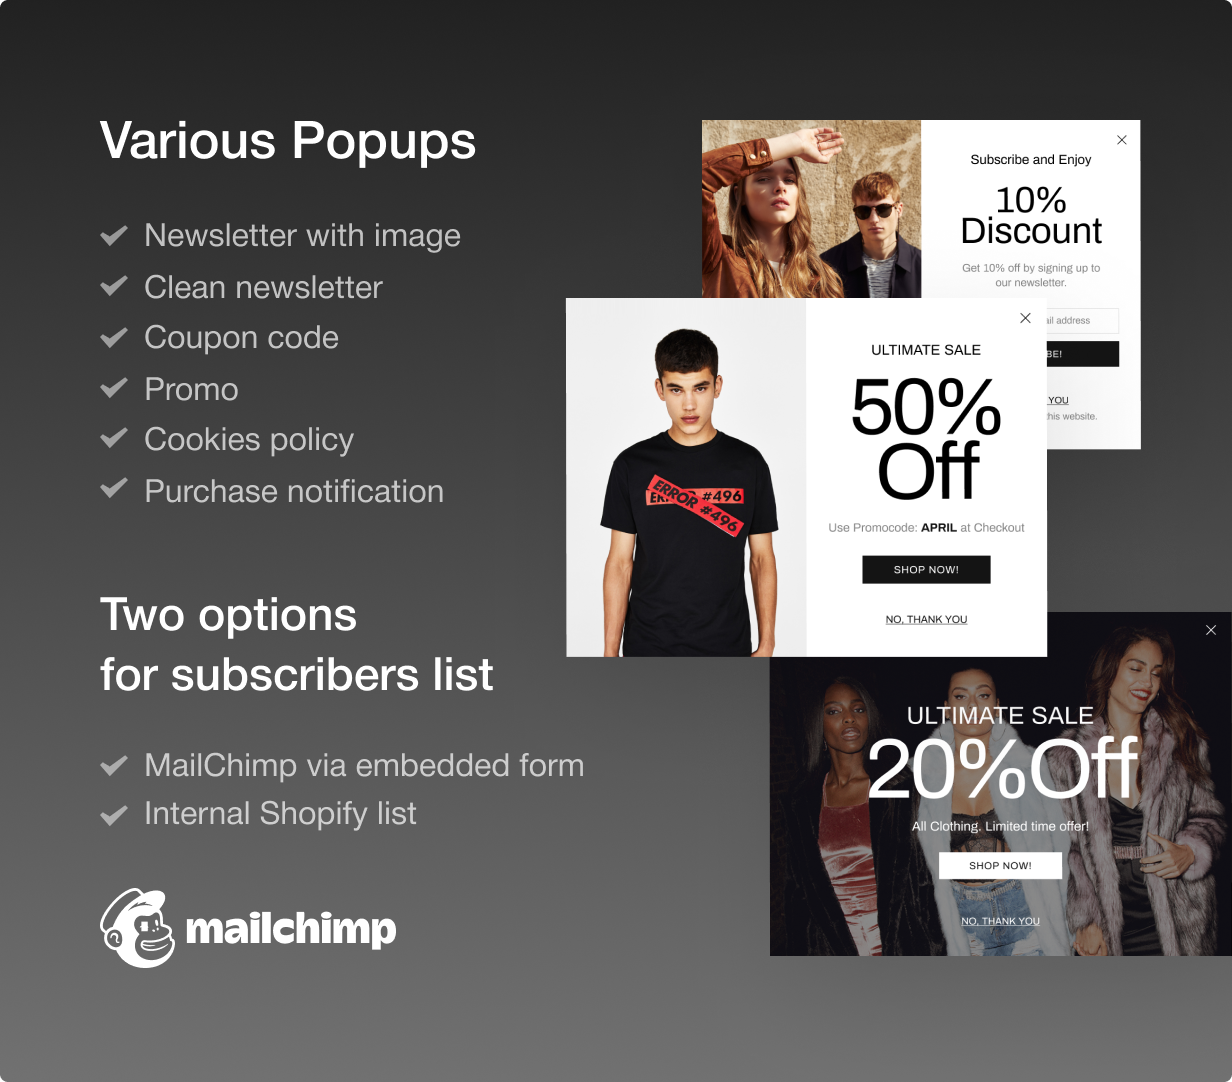 12 various popups - Shella - Multipurpose Shopify theme, fastest with the banner builder